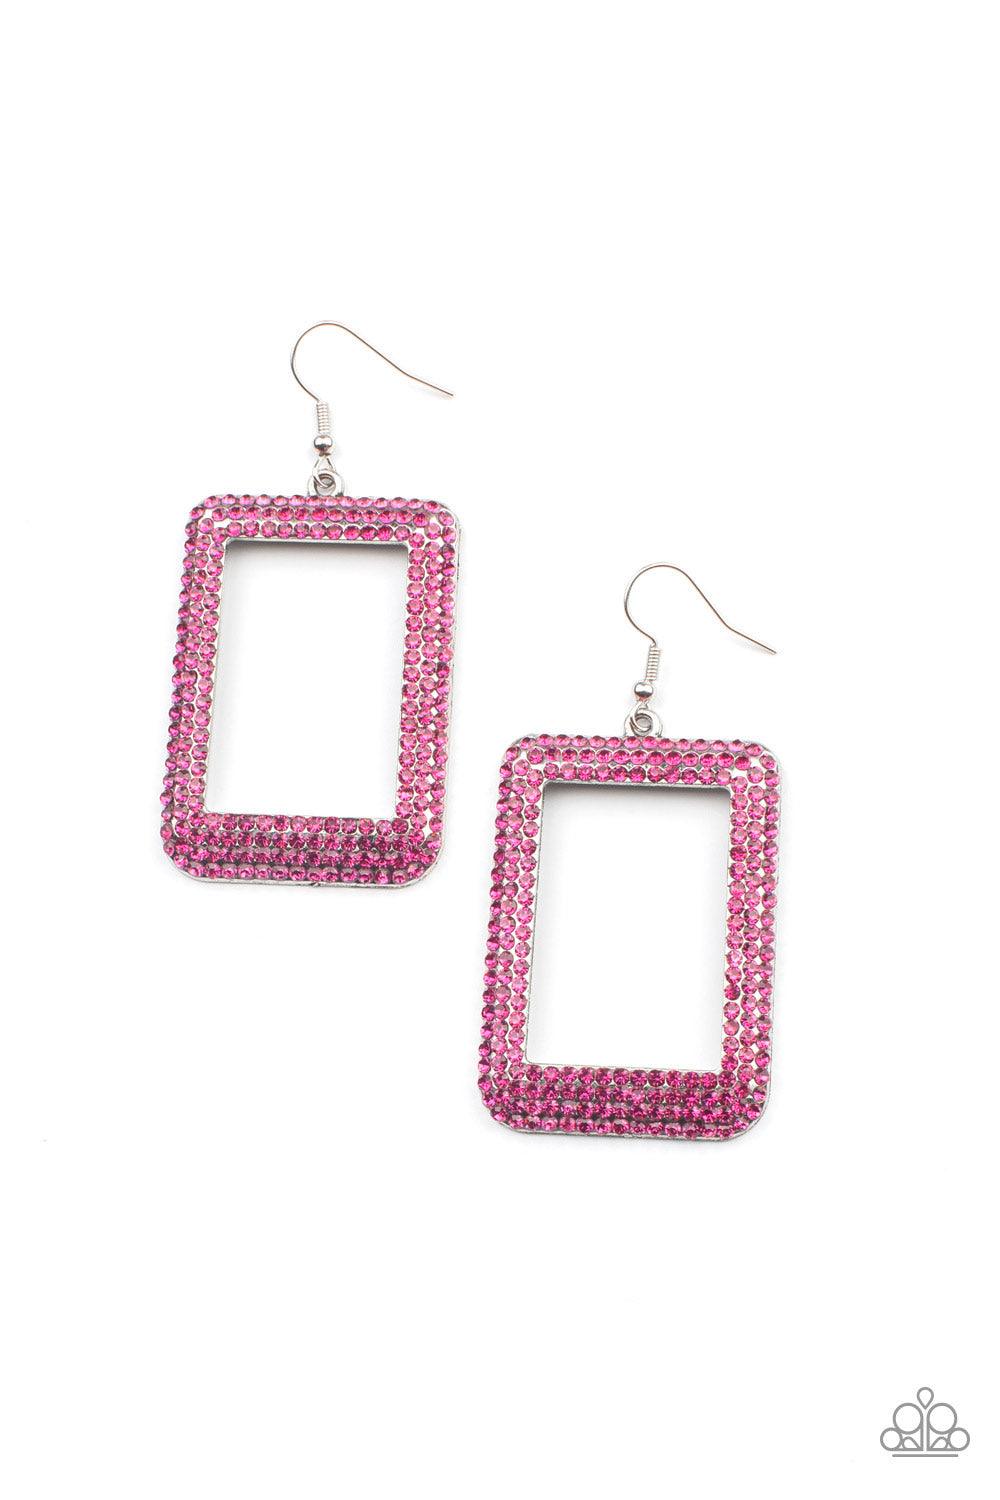 Paparazzi Accessories World FRAME-ous - Pink Bordered in rows of glittery pink rhinestones, an oversized silver rectangular frame swings from the ear for a fashionable finish. Earring attaches to a standard fishhook fitting. Sold as one pair of earrings.